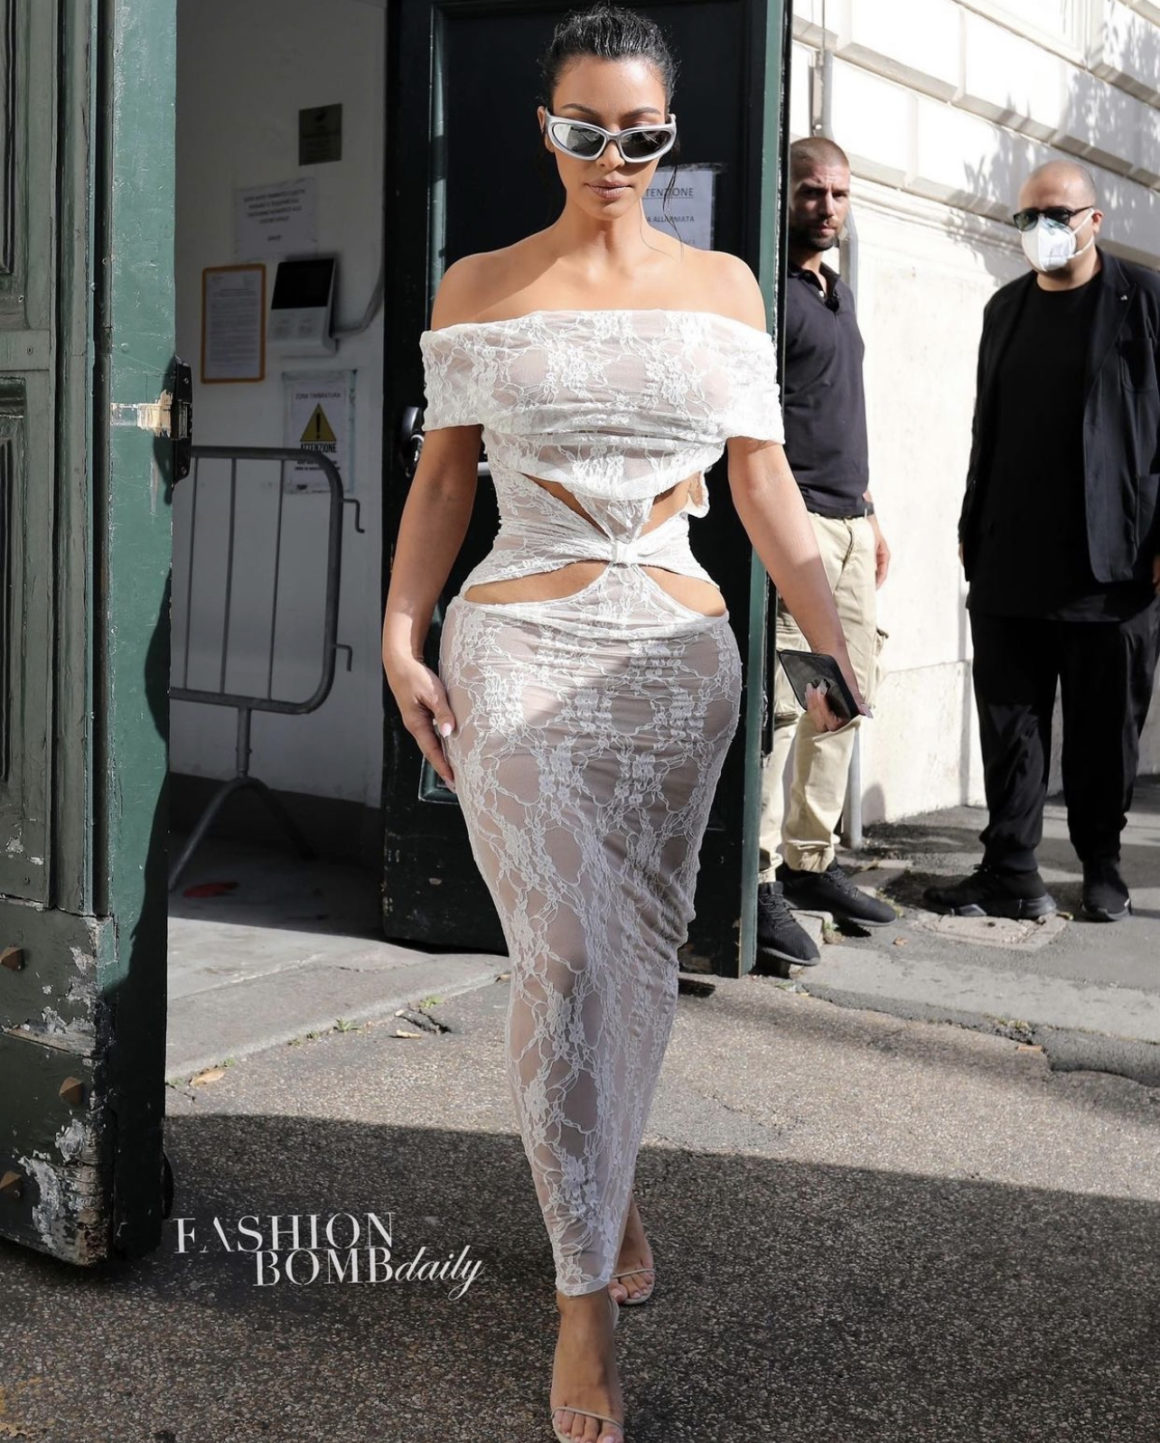 Kim Kardashian Visits the Vatican in Barragan White Off the Shoulder Cutout Sheer Lace Dress Balenciaga Sunglasses and Yeezy Nude Double Strap Sandals